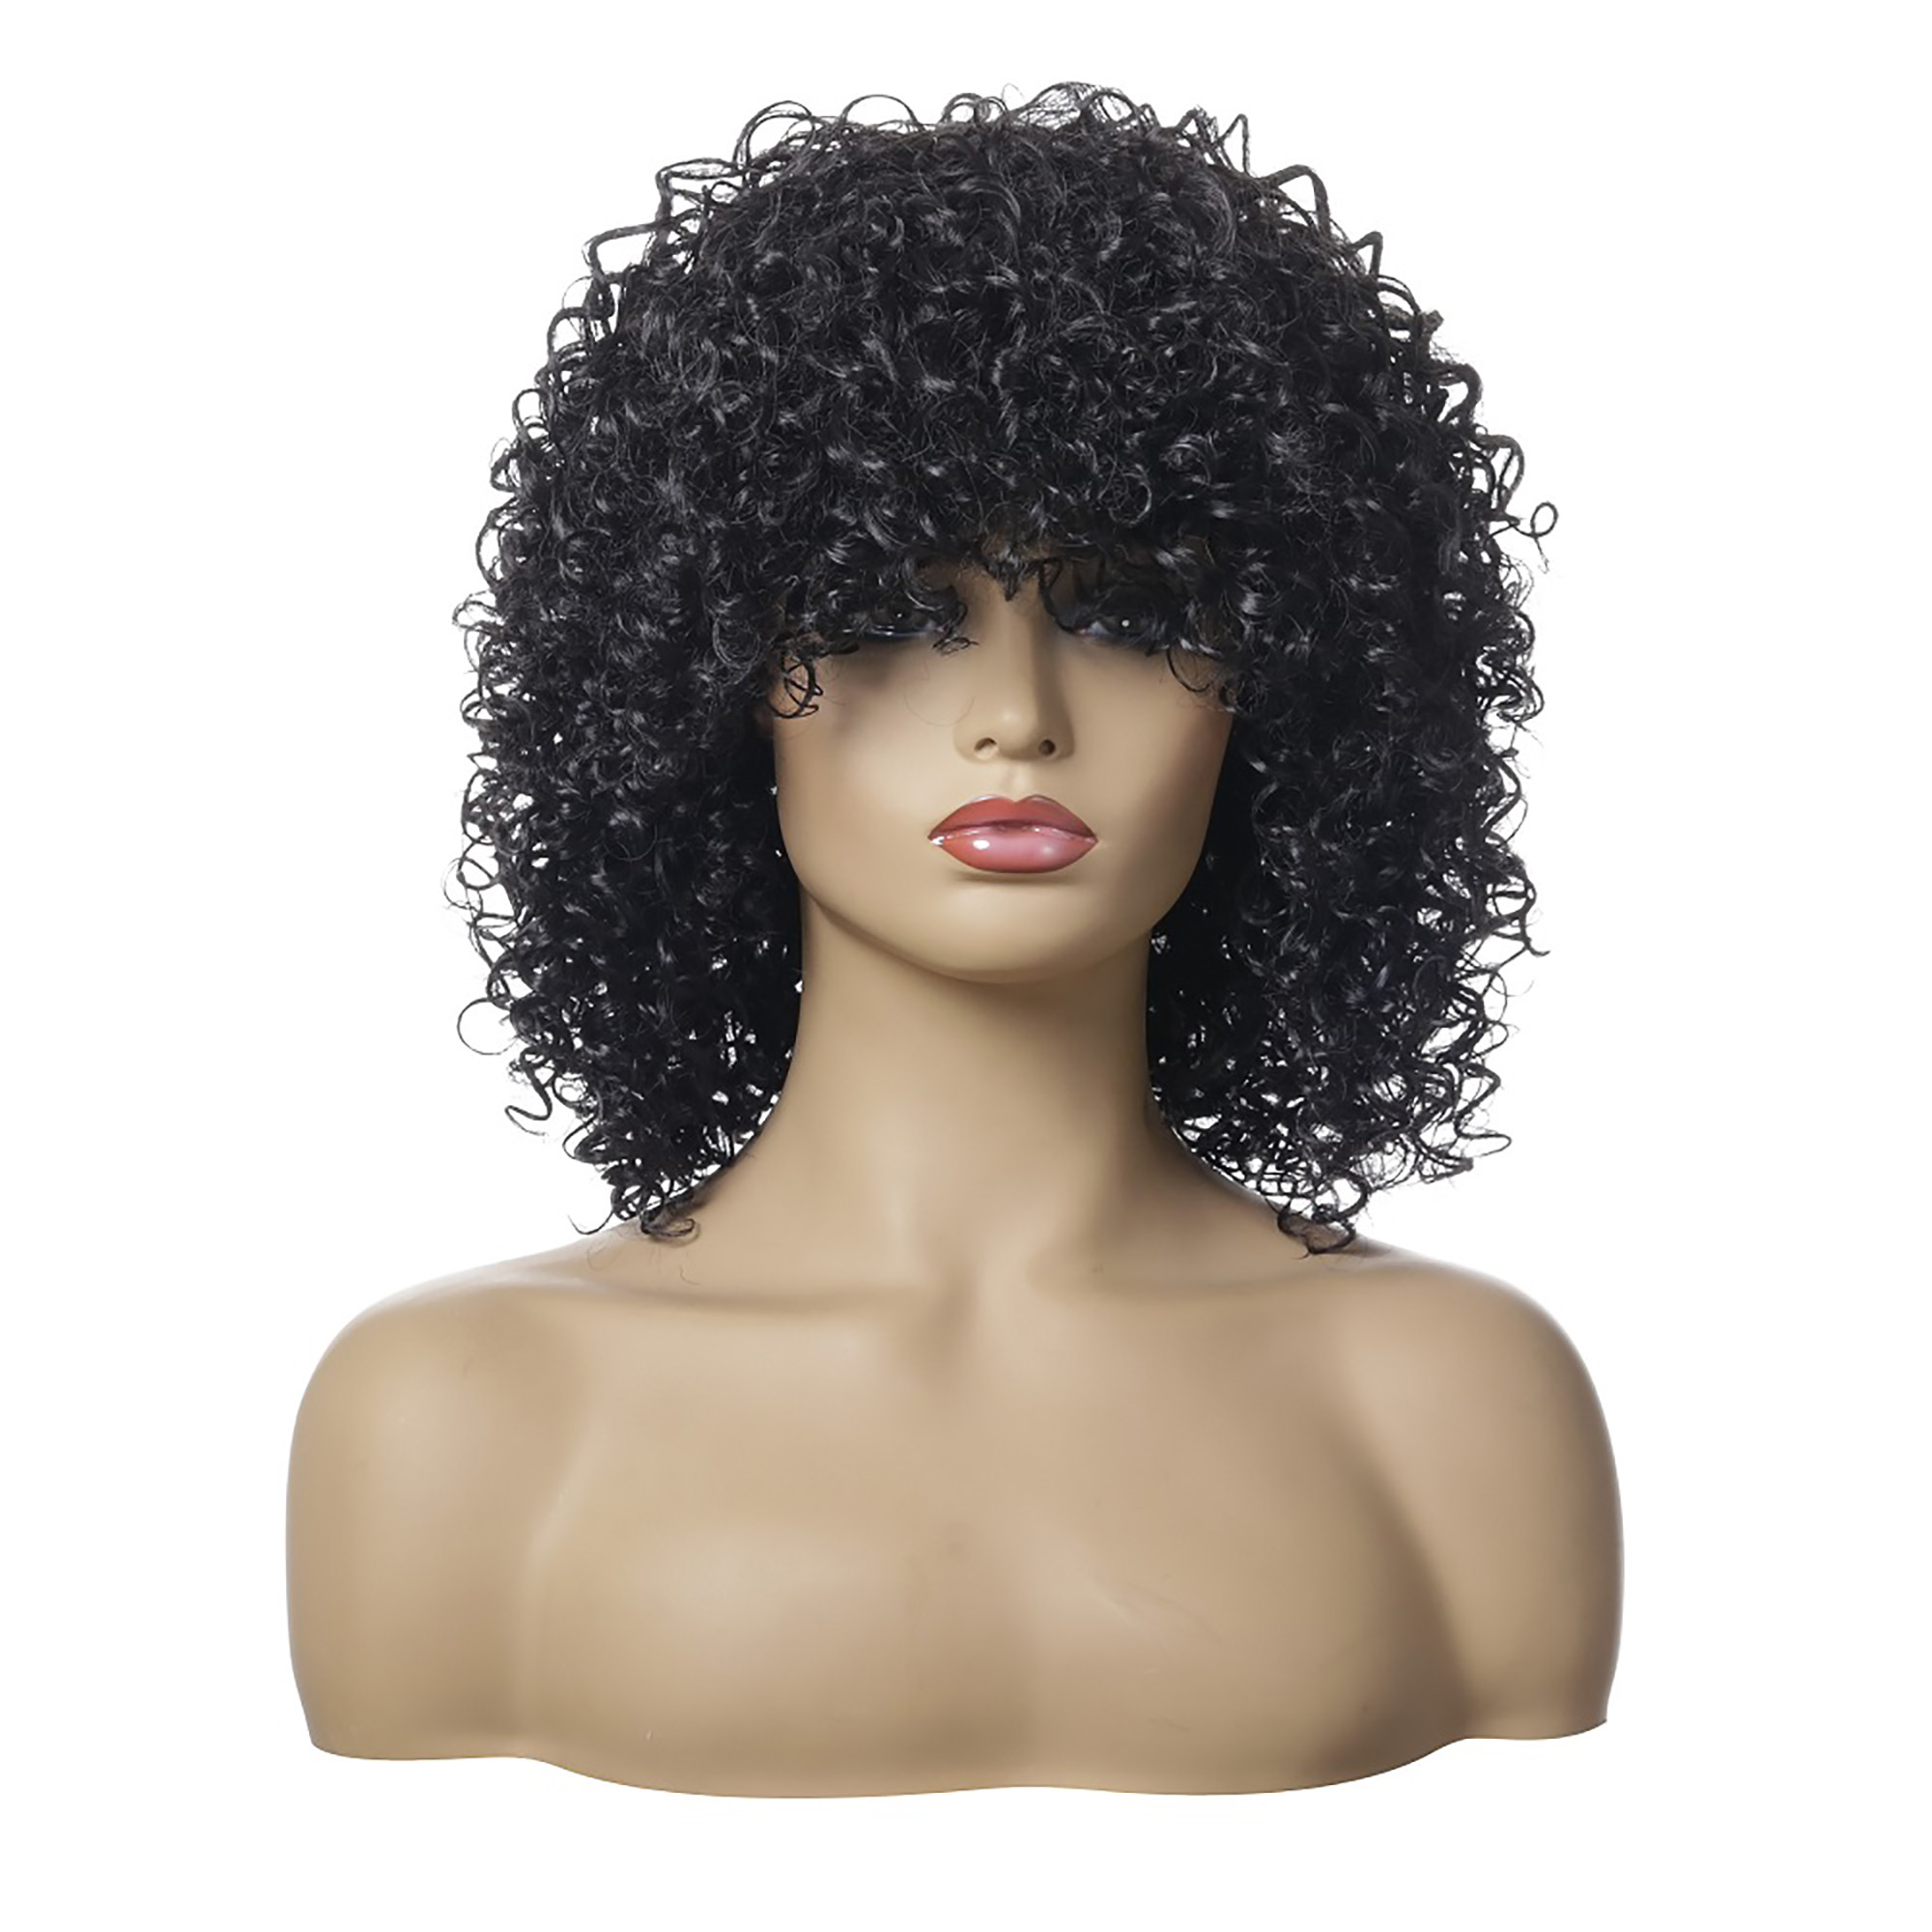 Women Short Afro Curly Wig Synthetic Natural Hair Wigs With Bangs